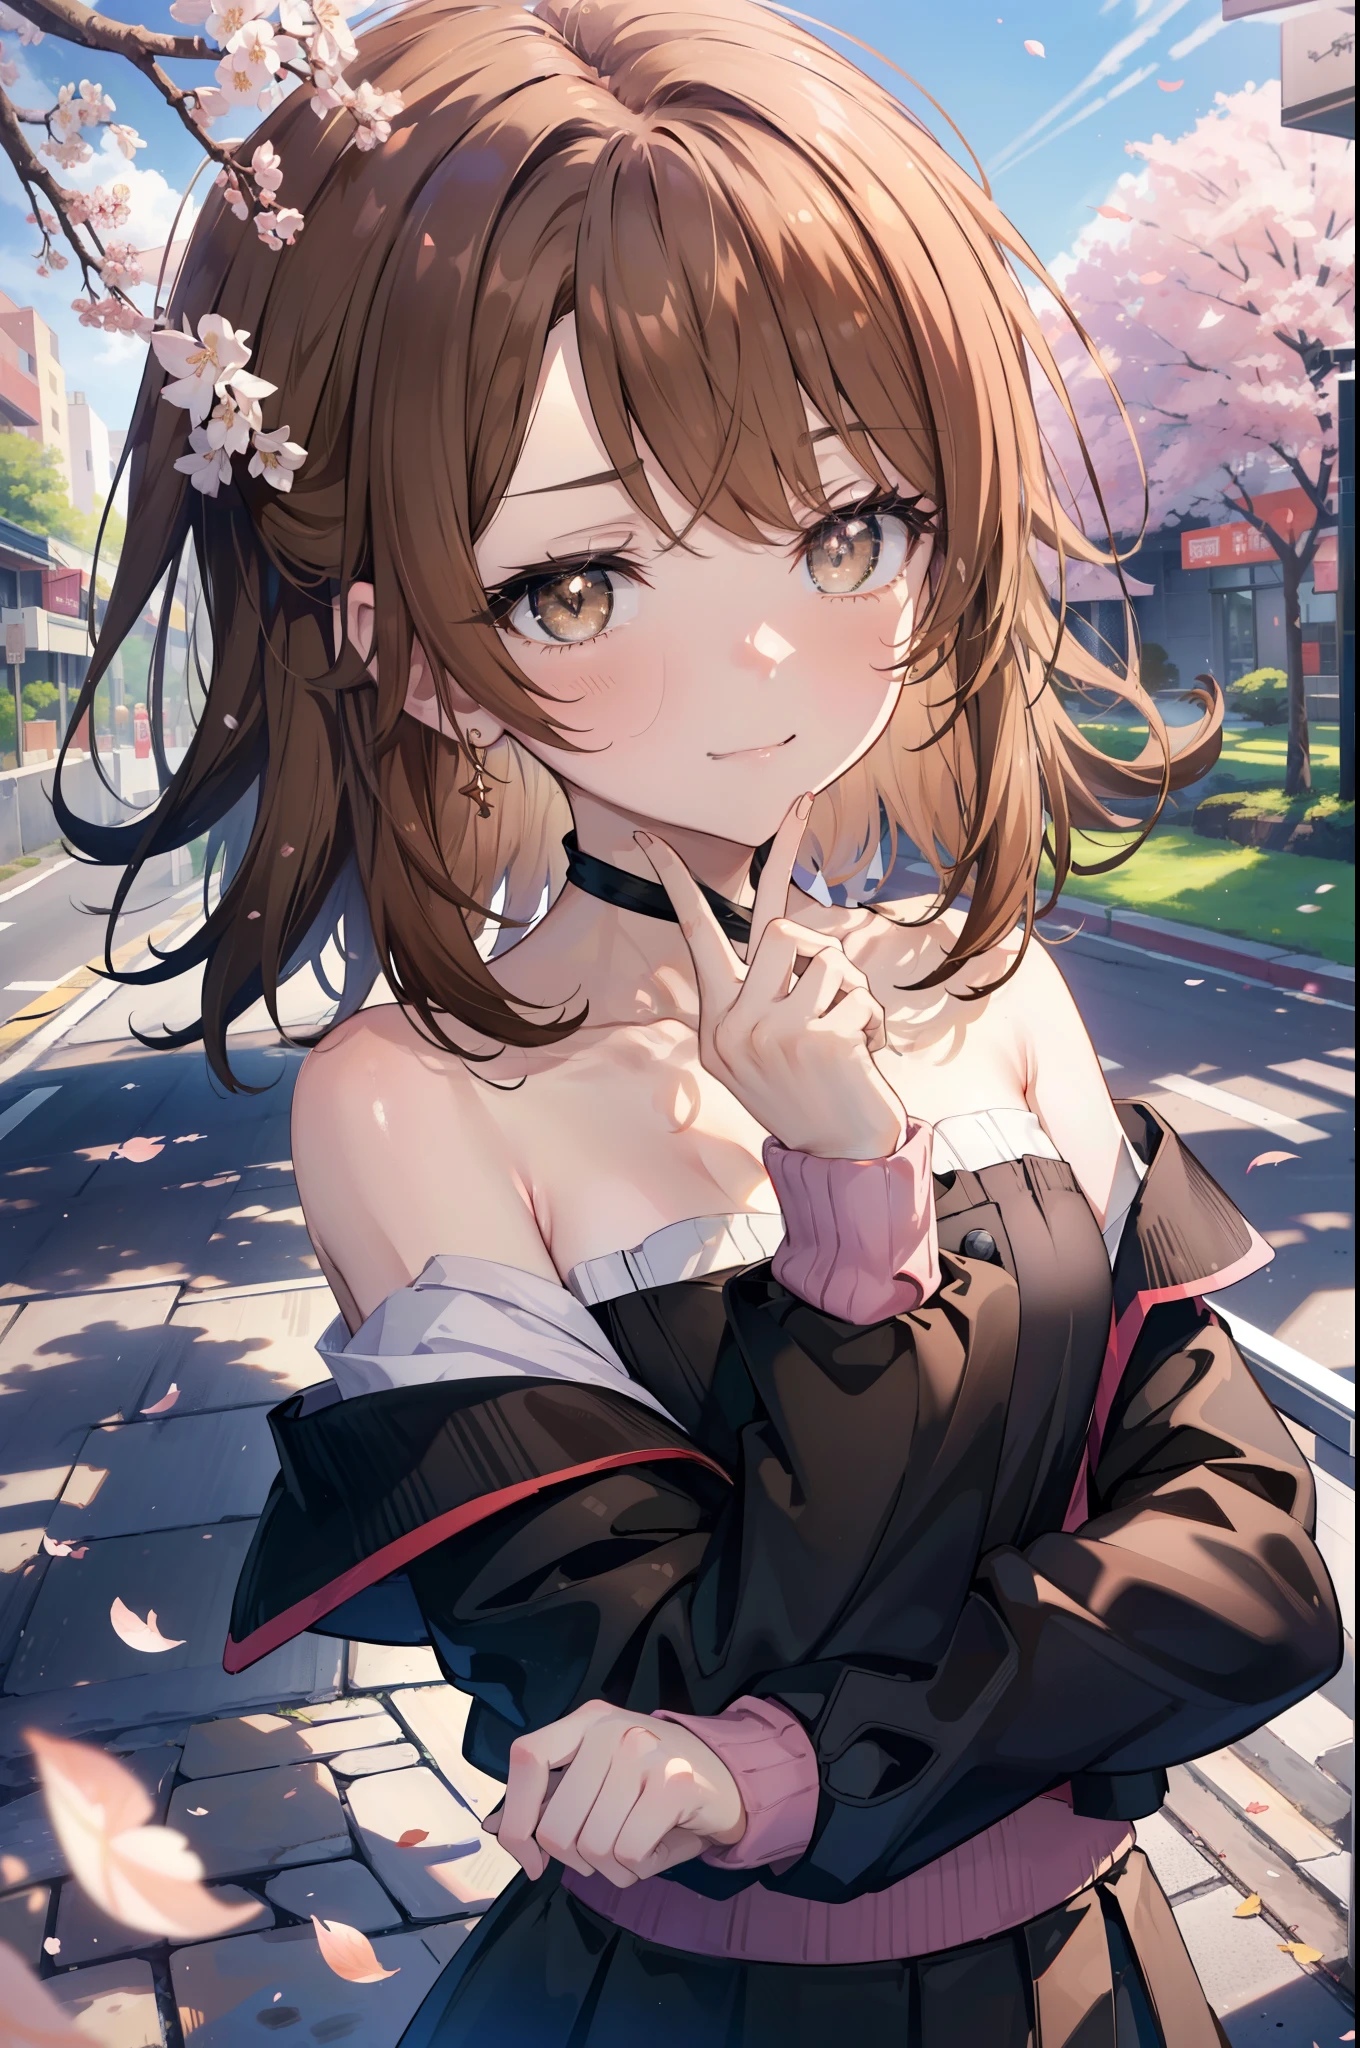 irohaisshiki, iroha isshiki, long hair, brown hair, (brown eyes:1.5), happy smile, smile, open your mouth,Put your hand over your mouth and make a peace sign,towards the camera,off shoulder sweater,bare shoulders,bare clavicle,naked neck,black long skirt,black tights,short boots,cherry blossoms are blooming,Cherry blossoms are scattered,
break indoors, Cherry blossom tree-lined path,
break looking at viewer,Upper body,
break (masterpiece:1.2), highest quality, High resolution, unity 8k wallpaper, (shape:0.8), (fine and beautiful eyes:1.6), highly detailed face, perfect lighting, Very detailed CG, (perfect hands, perfect anatomy),